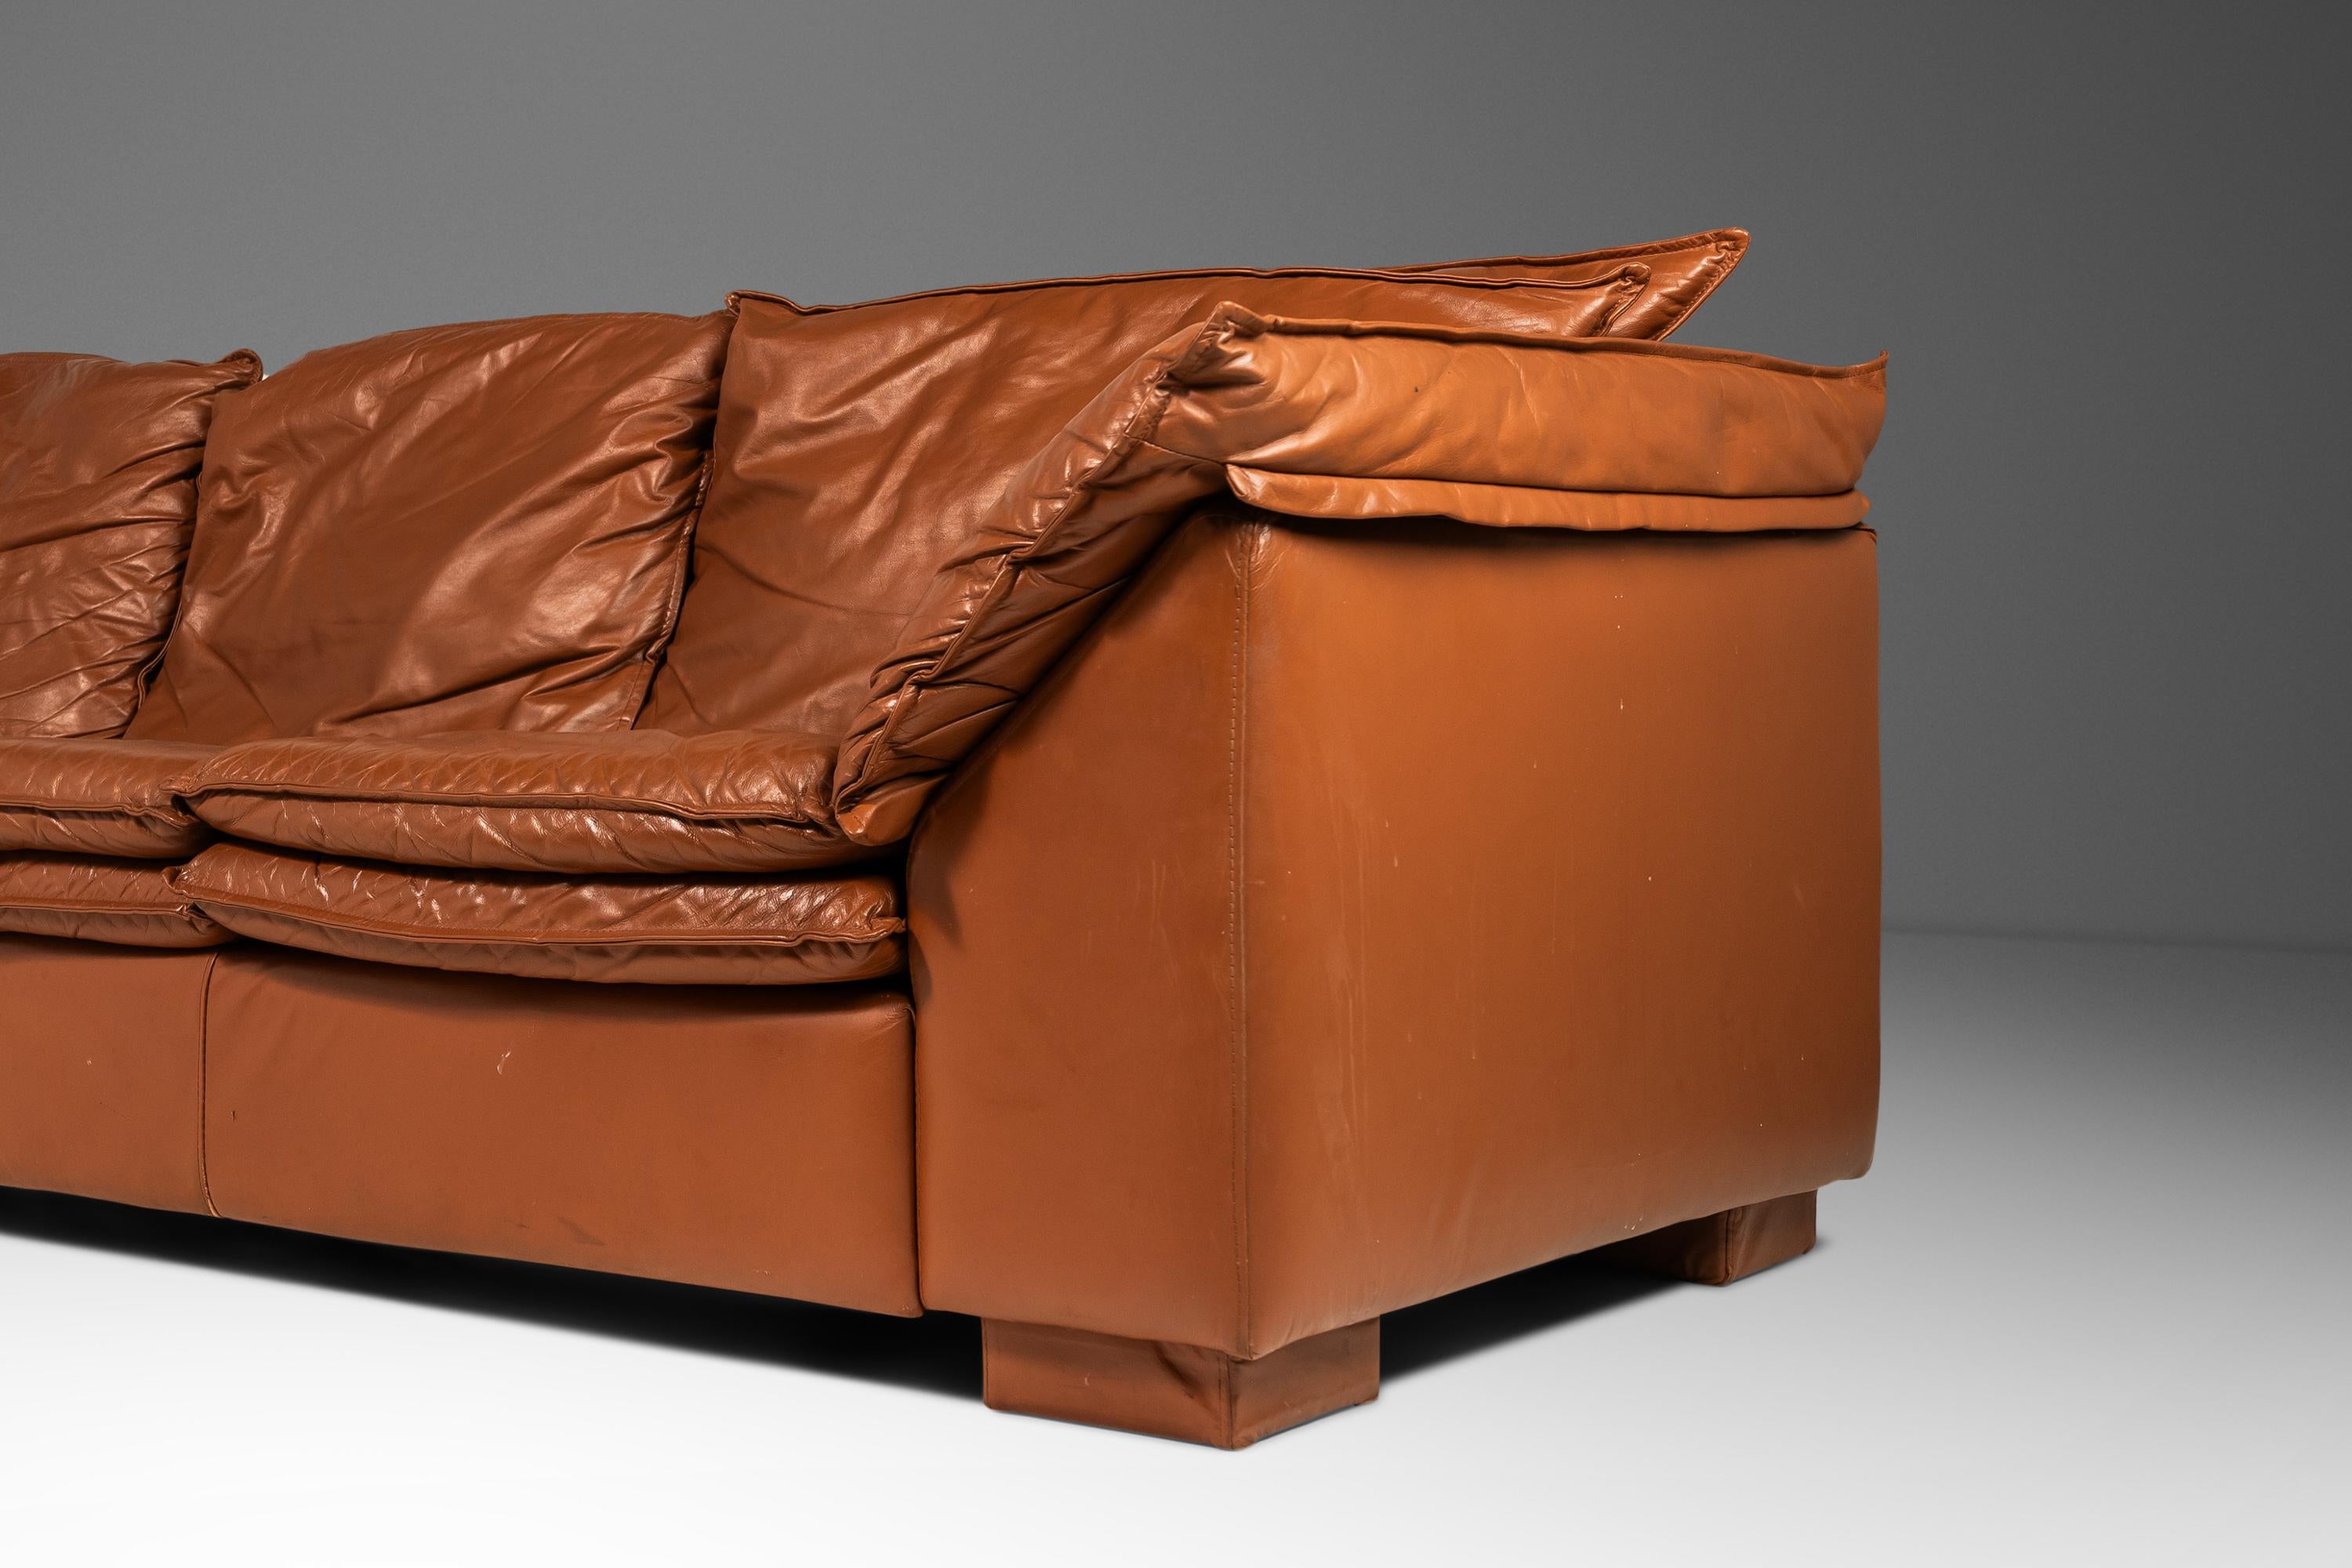 Low Profile Sofa in Cognac Brown Leather in the Manner of Niels Eilersen, 1980's For Sale 5